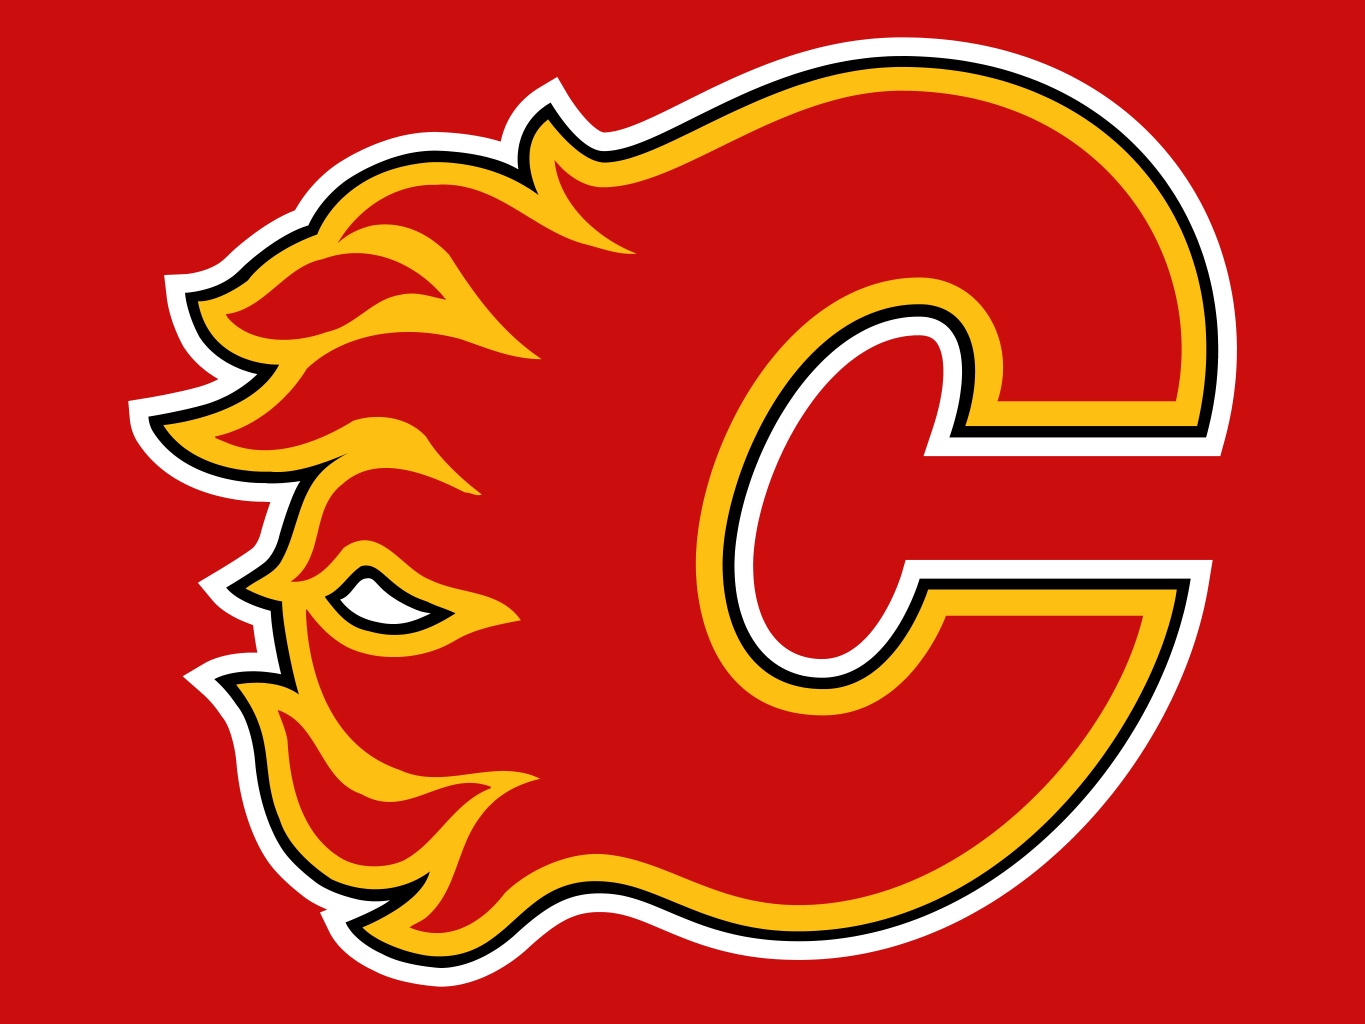 HD Calgary Flames Wallpapers and Photos | HD Sports Wallpapers